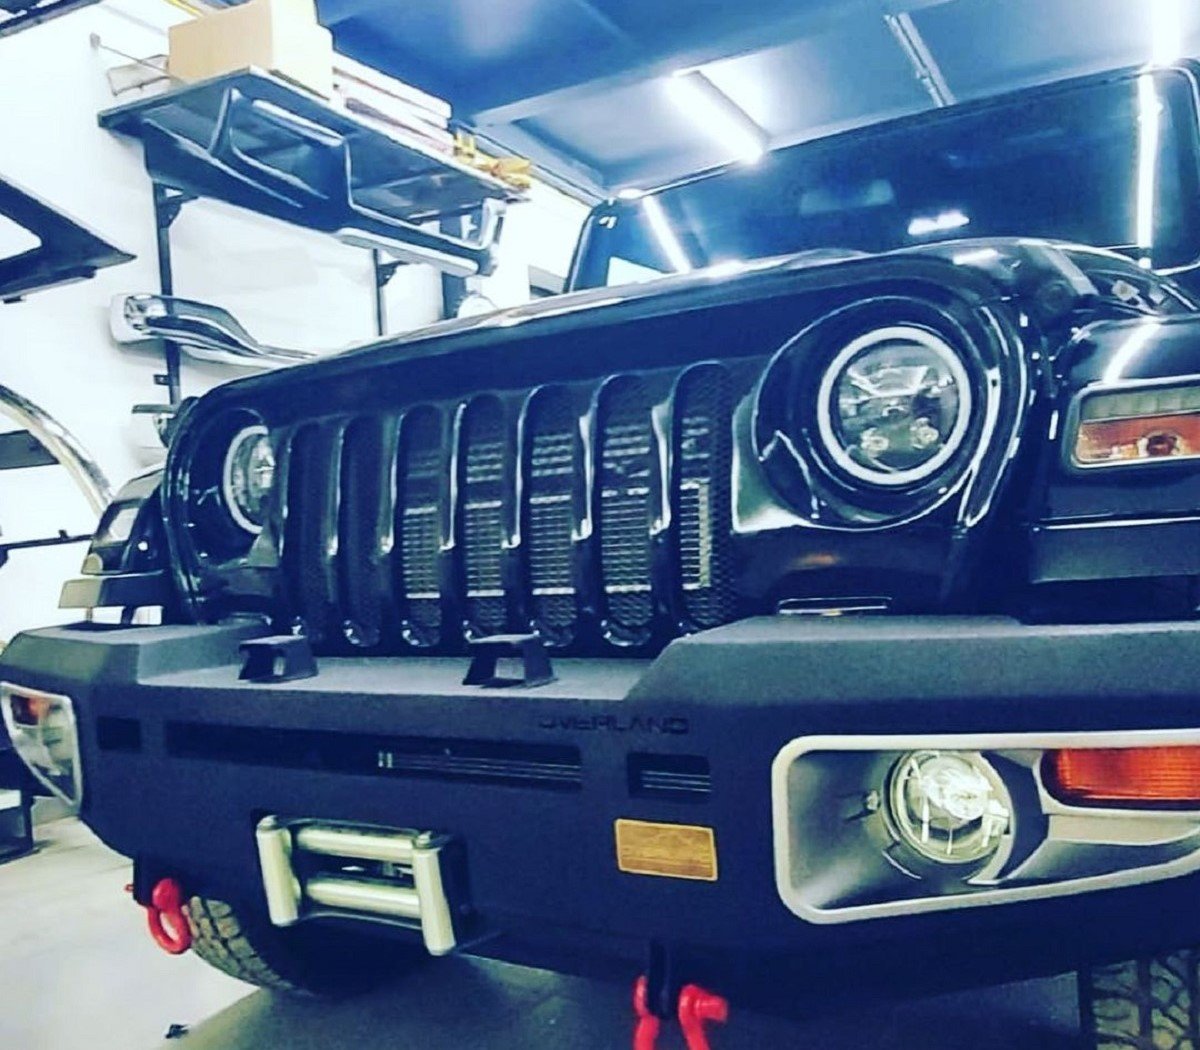 Mahindra Thar Gets Closer to Jeep Wrangler With Aftermarket Grille & Bumper